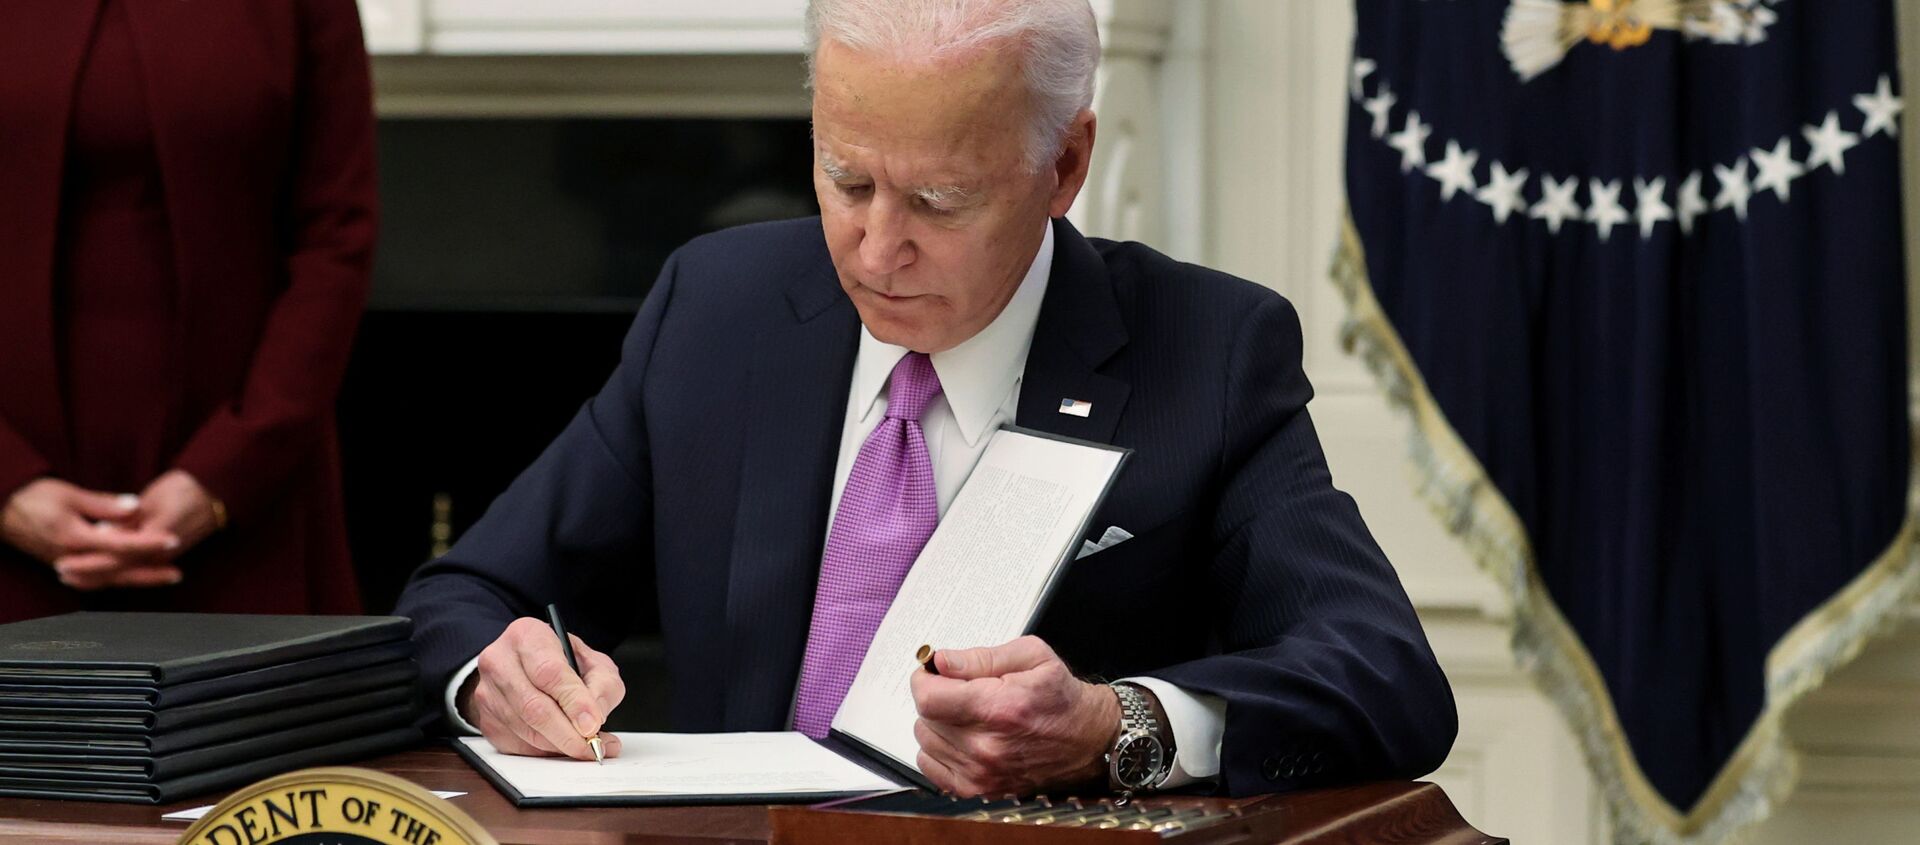 U.S. President Joe Biden signs an executive order as part of his administration's plans to fight the coronavirus disease (COVID-19) pandemic during a COVID-19 response event at the White House in Washington, U.S., January 21, 2021. - Sputnik International, 1920, 21.01.2021